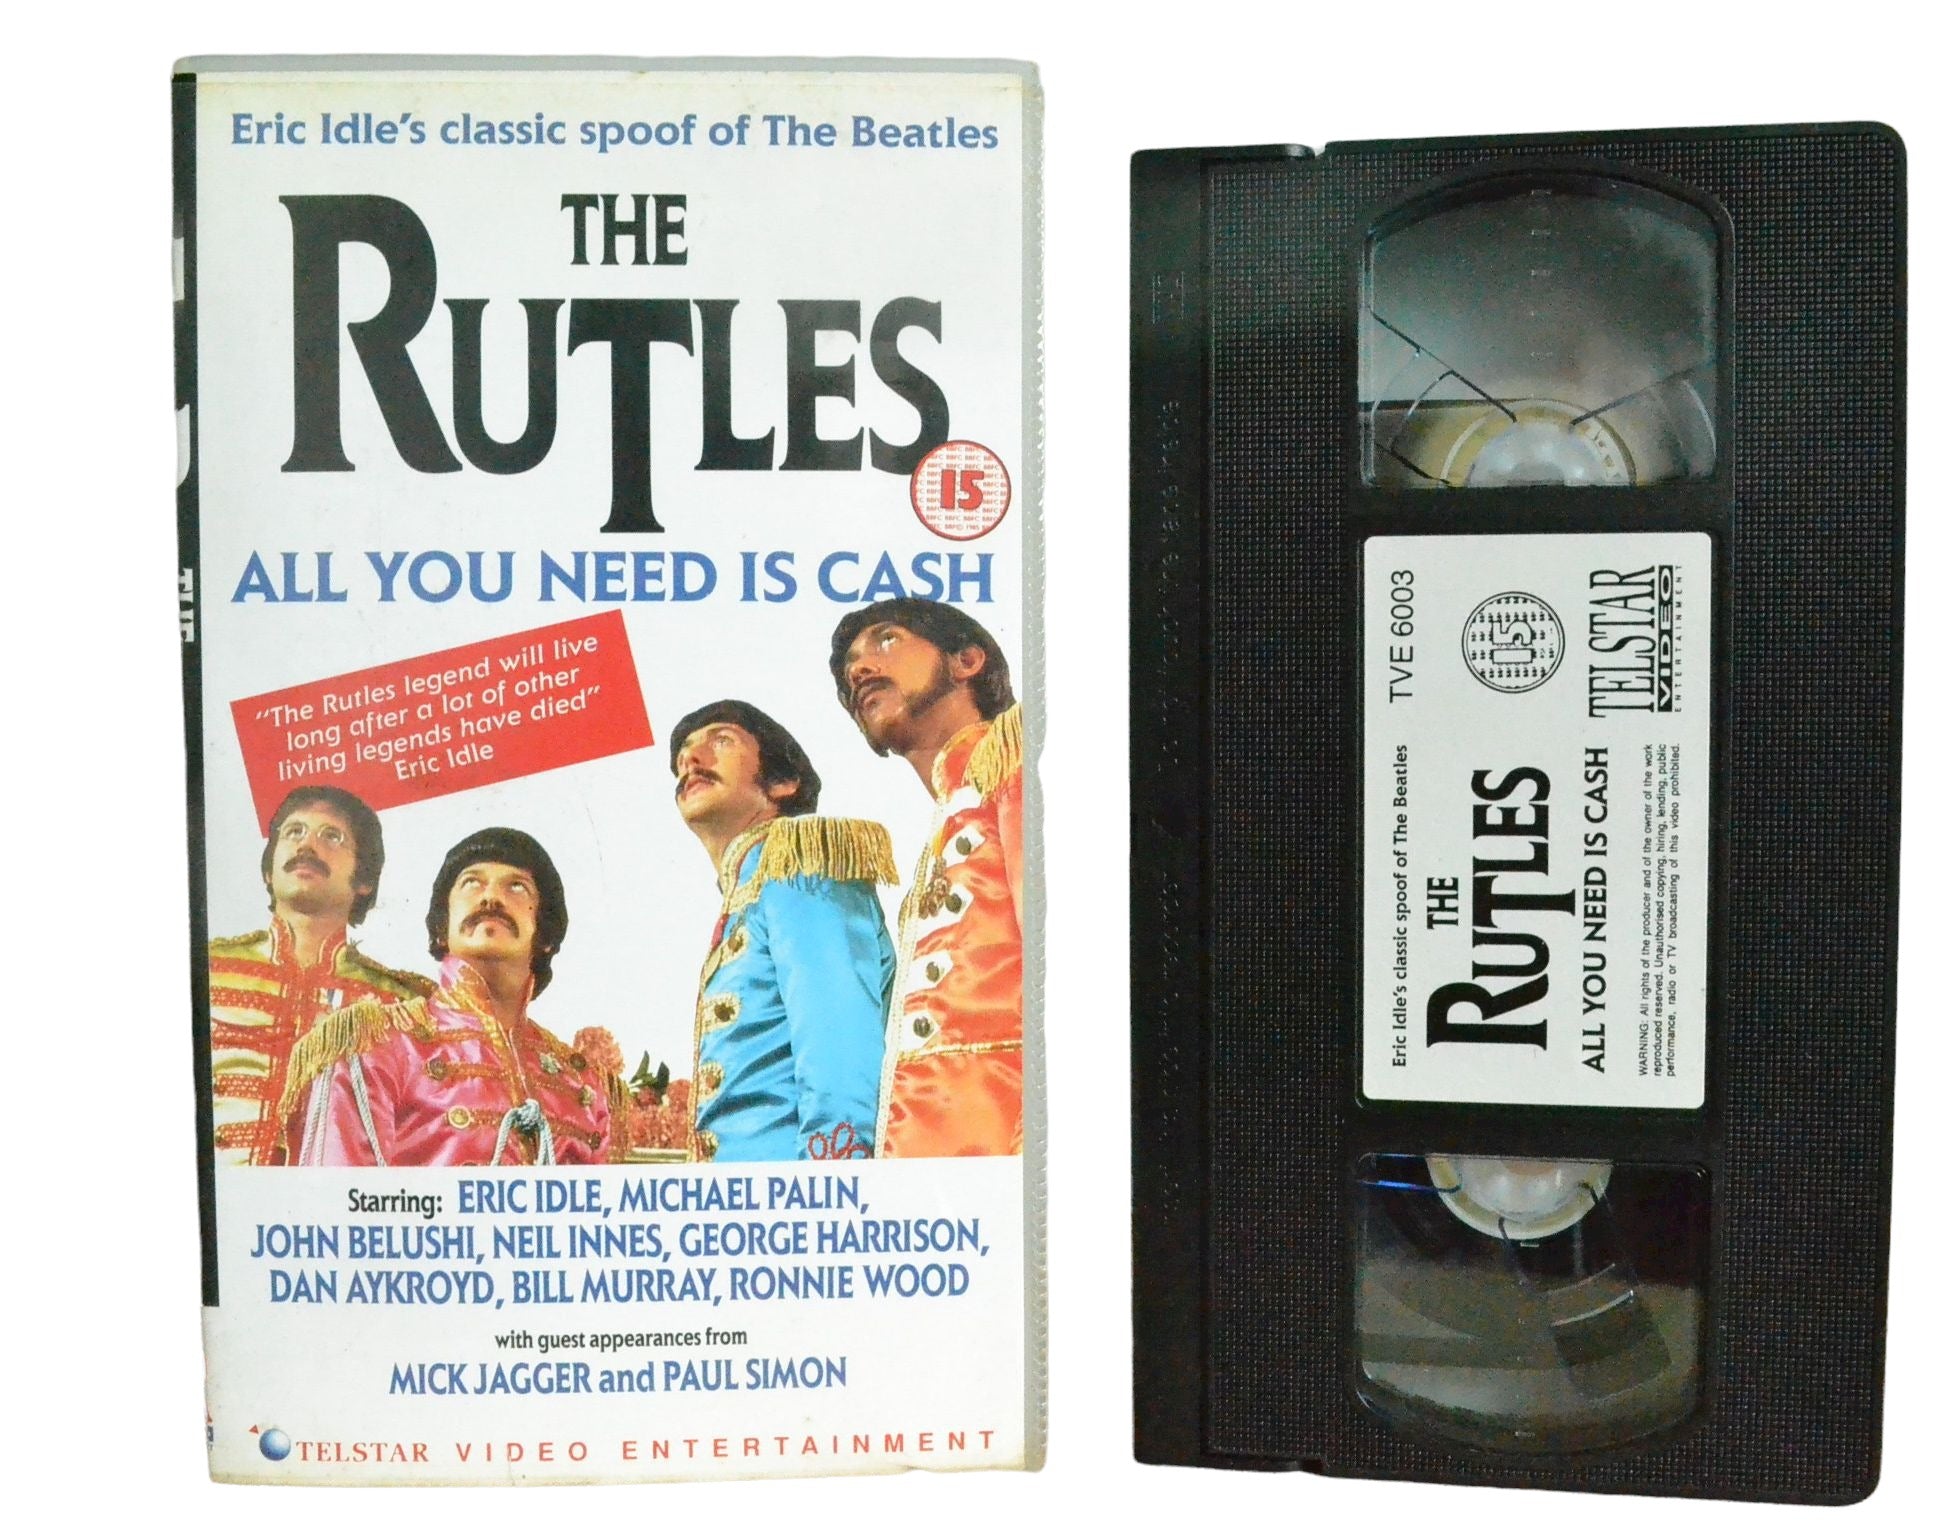 The Rutles - All You Need Is Cash - Eric Idle - Telstar Video Entertainment - Music - Pal VHS-